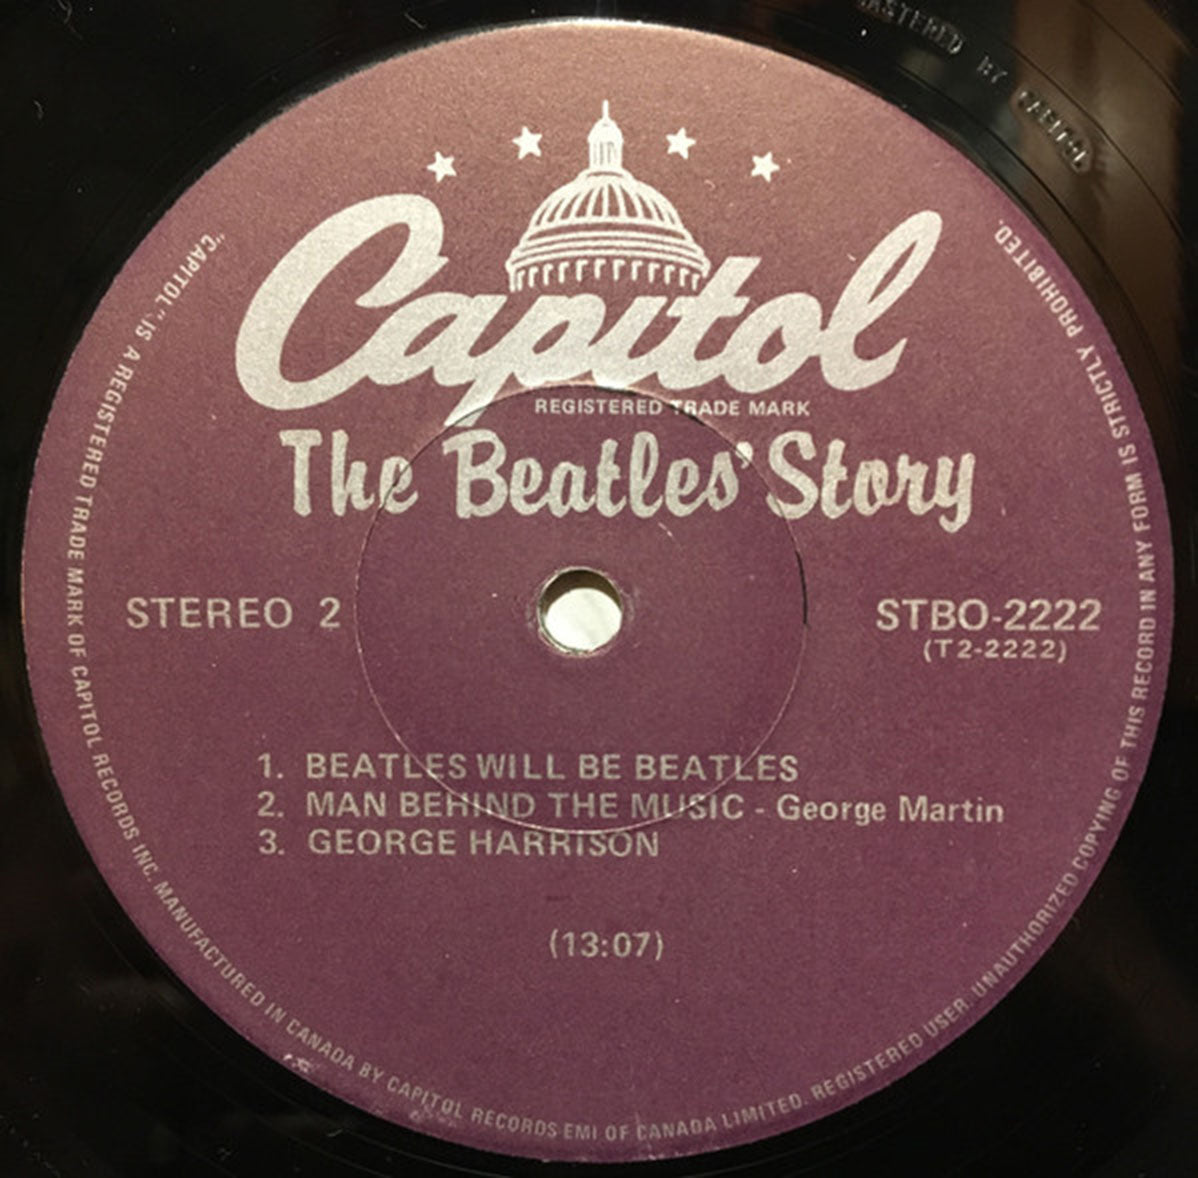 The Beatles – The Beatles' Story - 1978